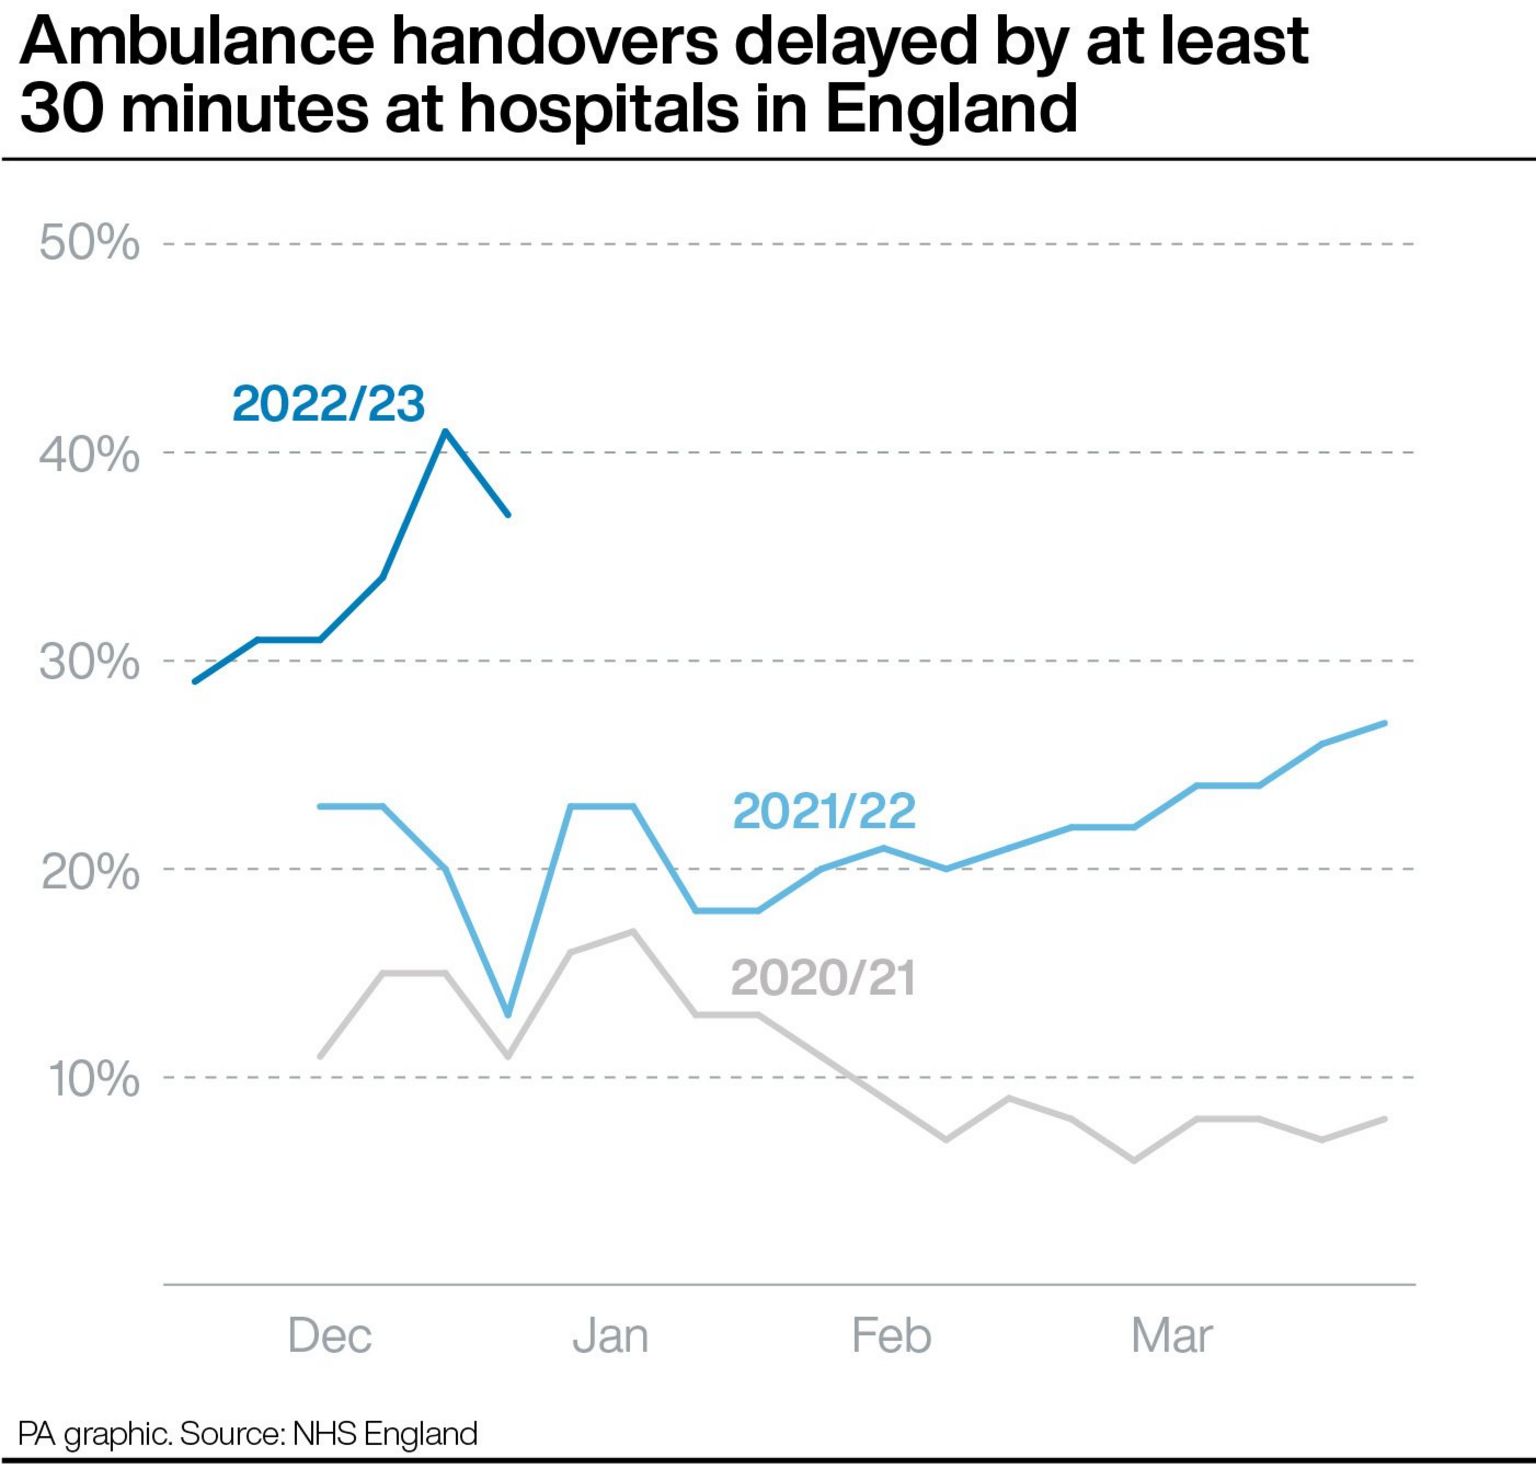 Graphic of ambulance handovers delayed by at least 30 minutes at hospitals in England